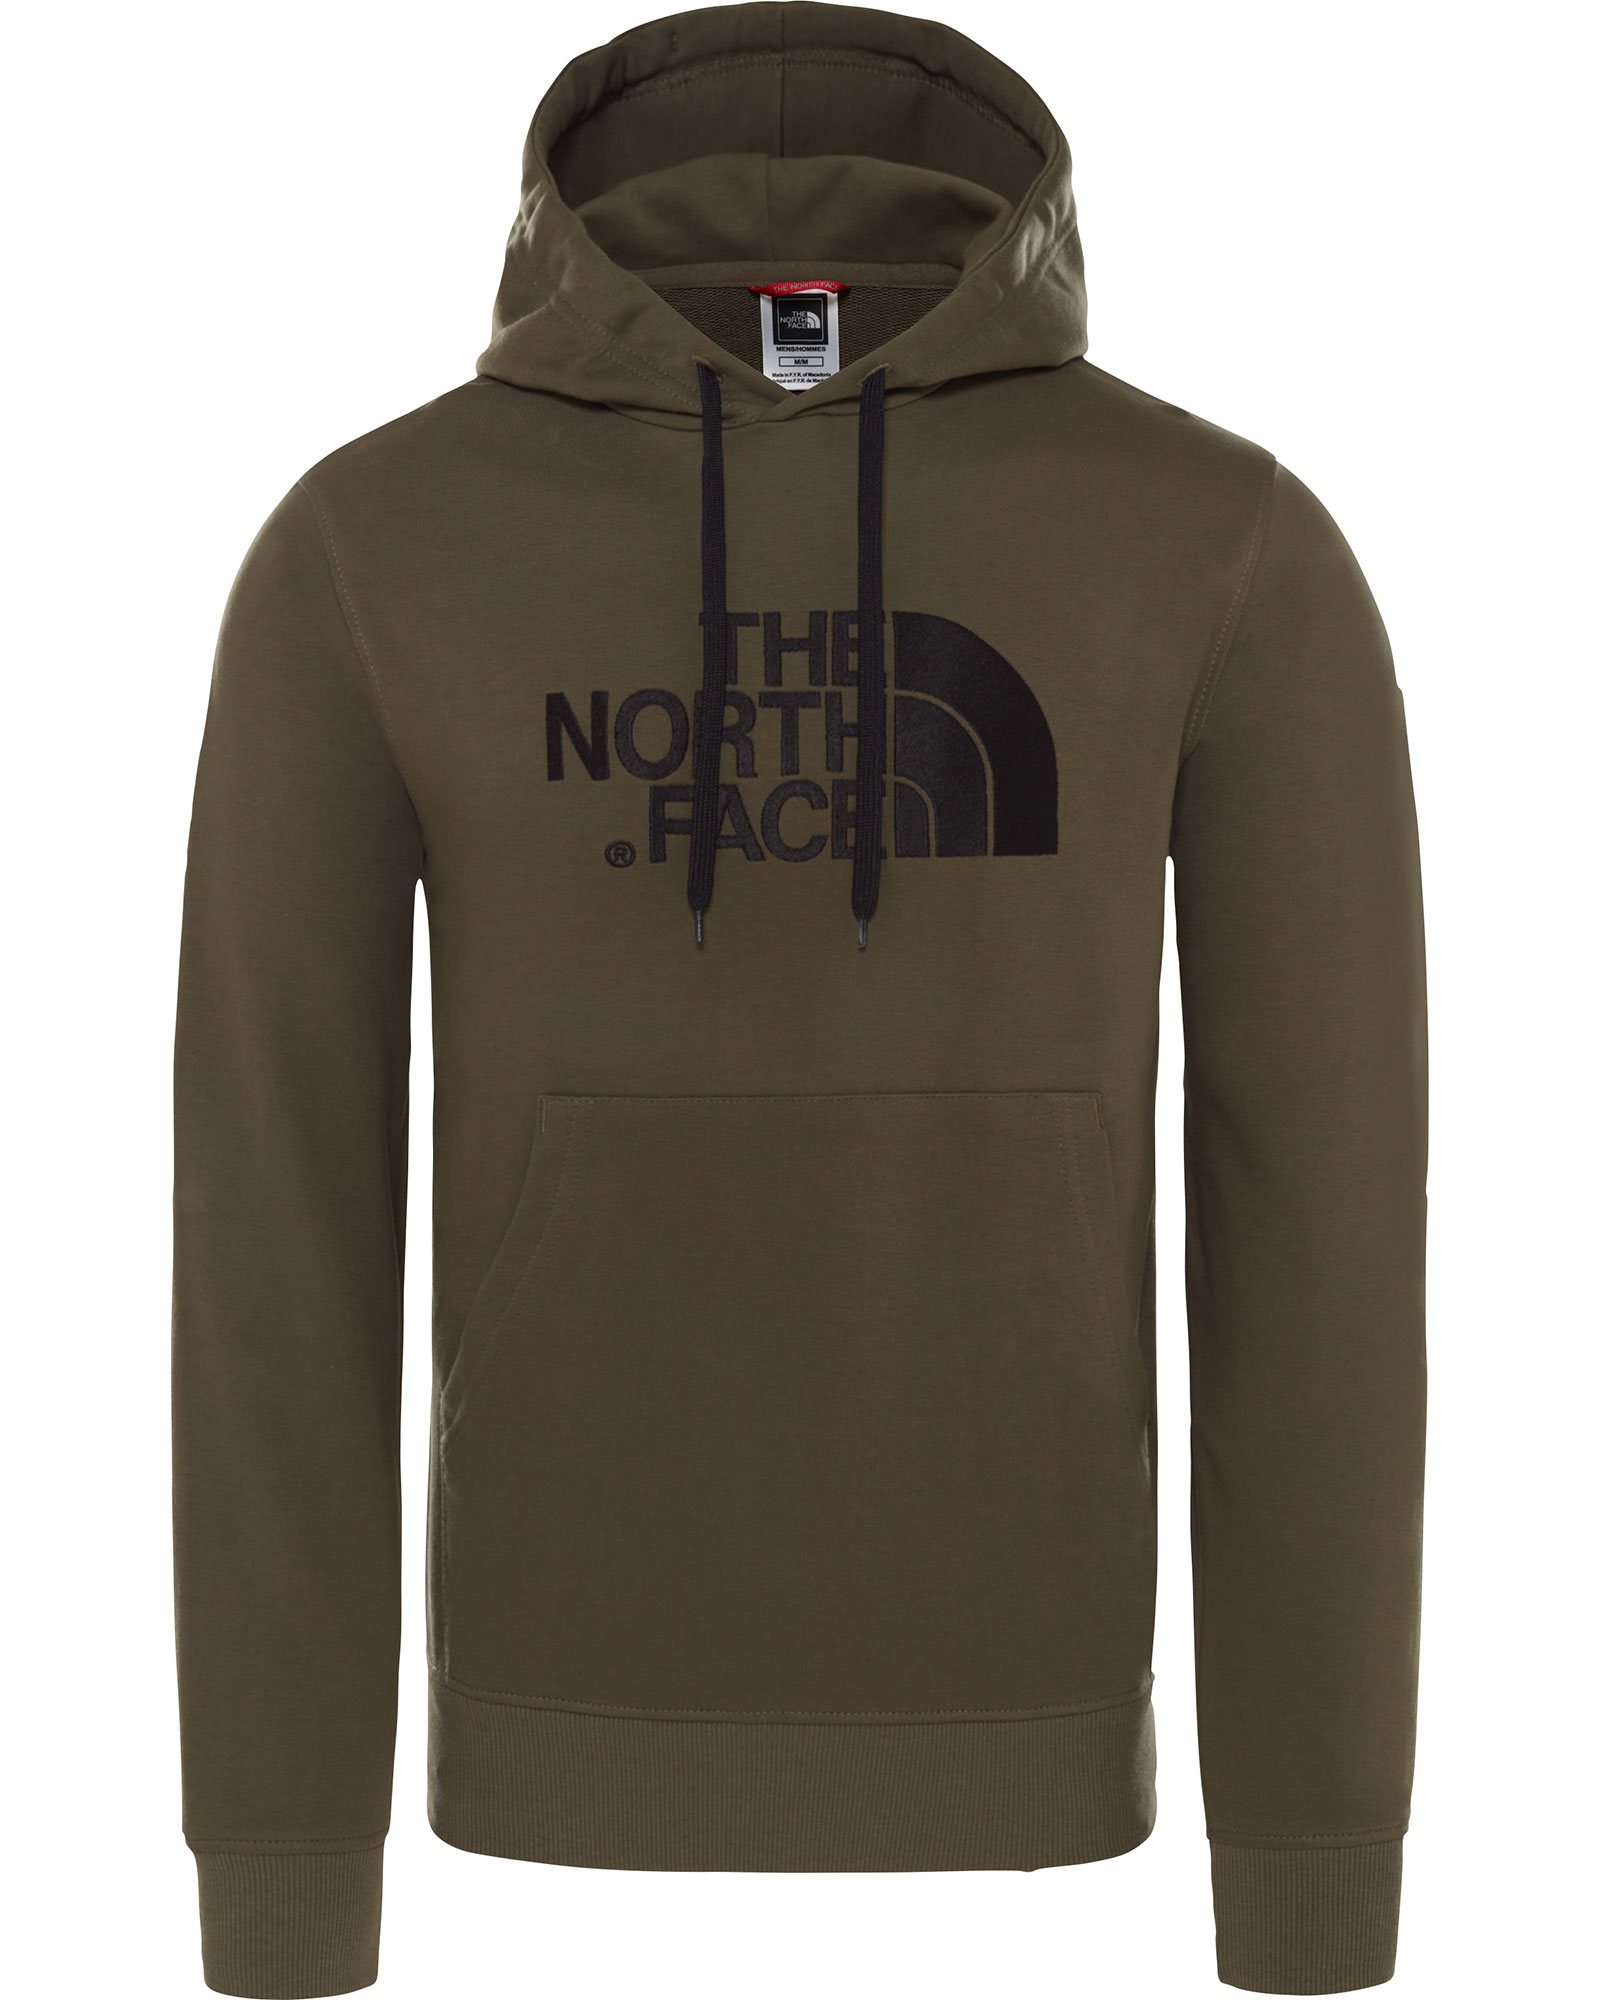 The North Face Men’s Light Drew Peak Pullover Hoodie - New Taupe Green S